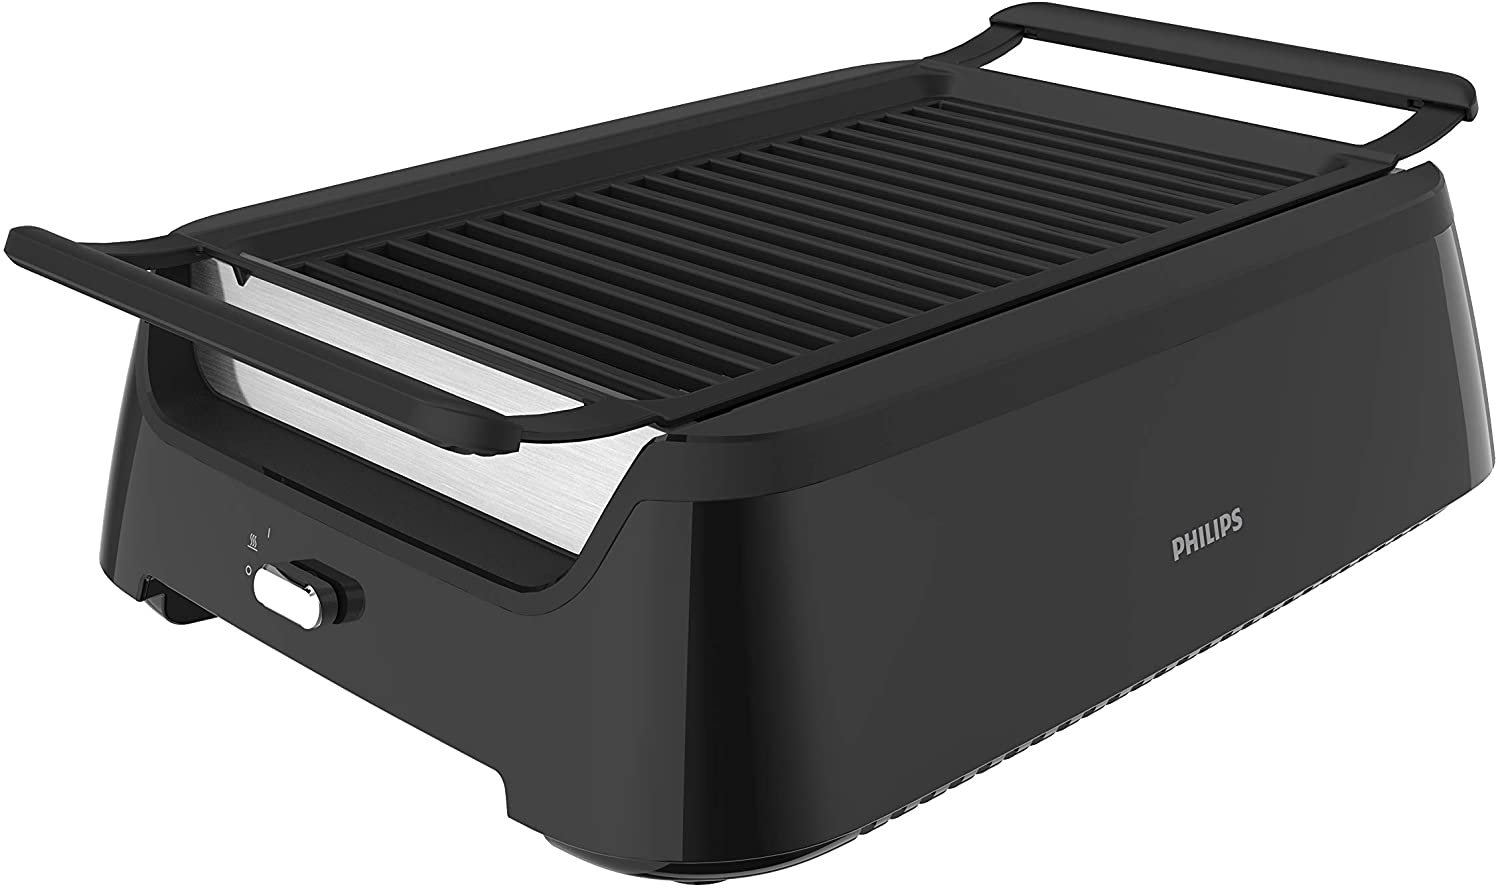 Philips Smoke-less HD6371:94 Electric Grill